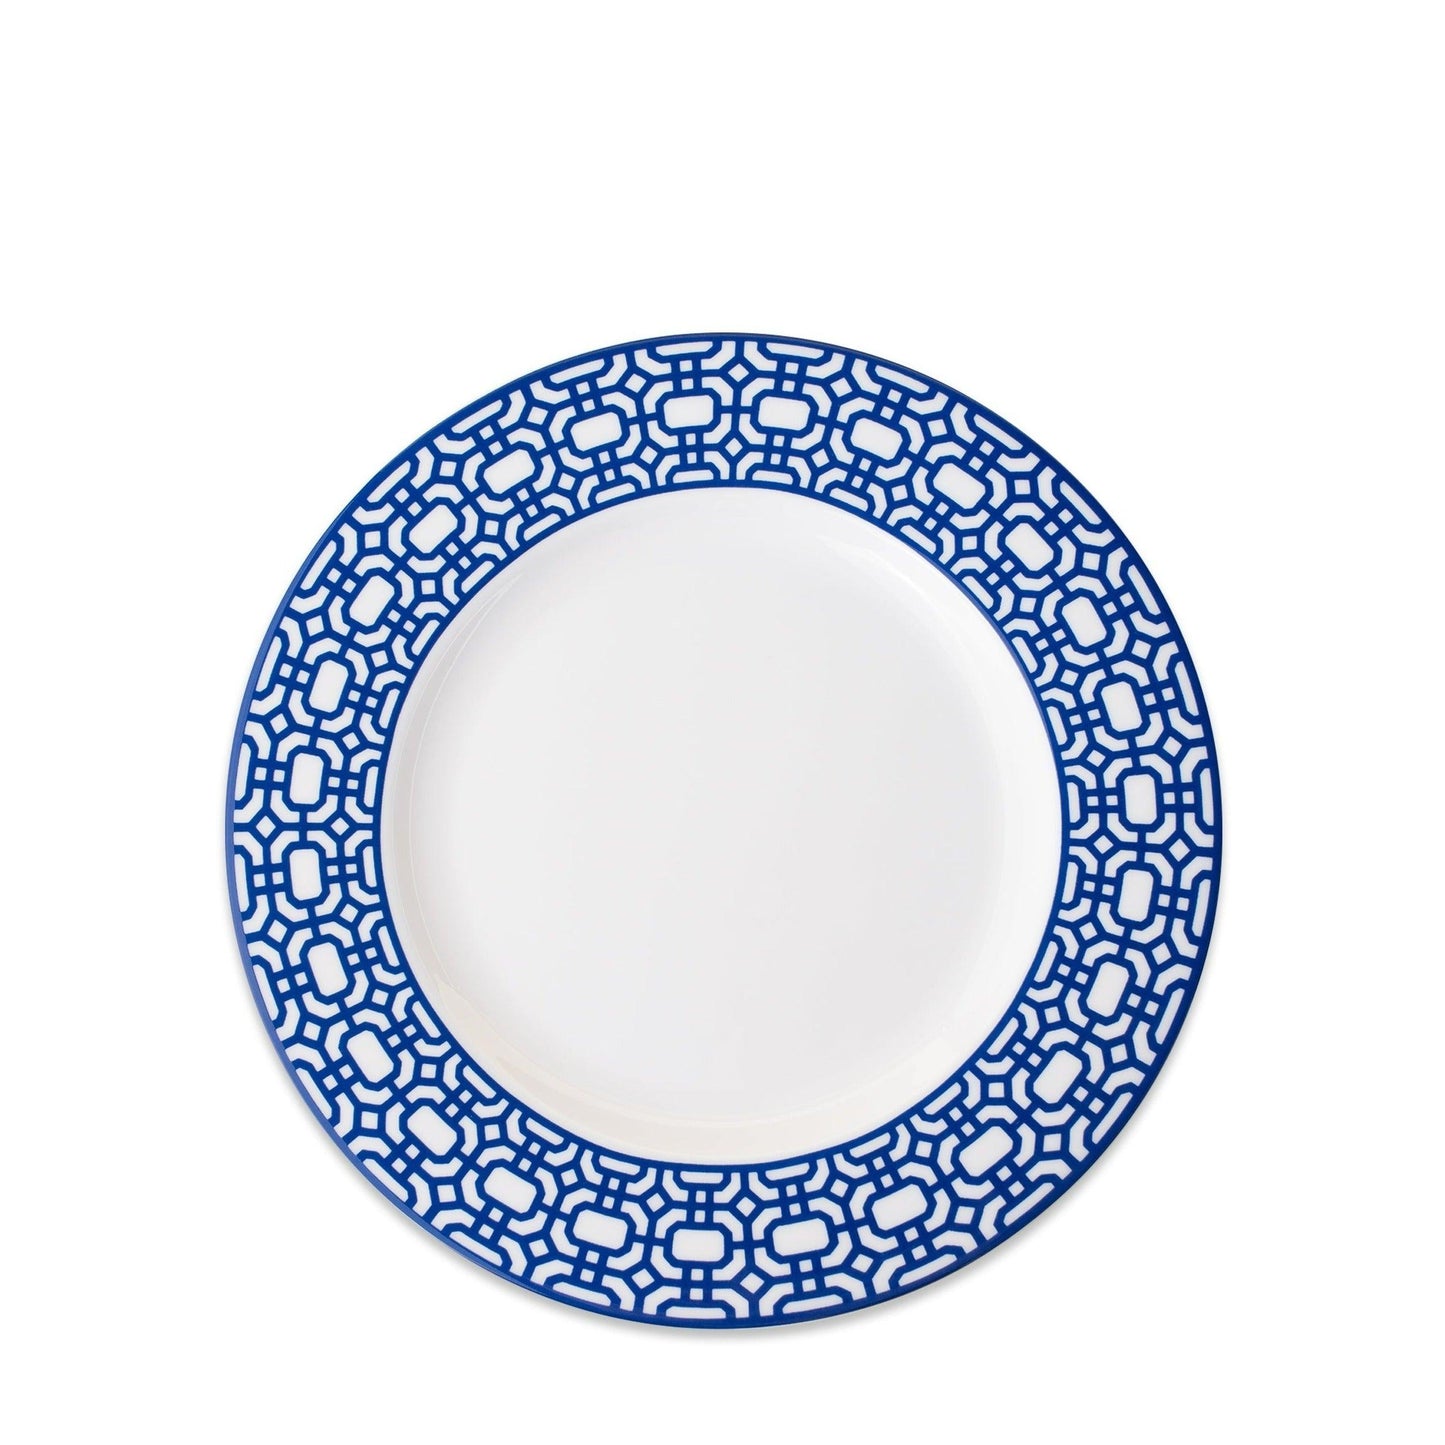 a blue and white plate on a white background